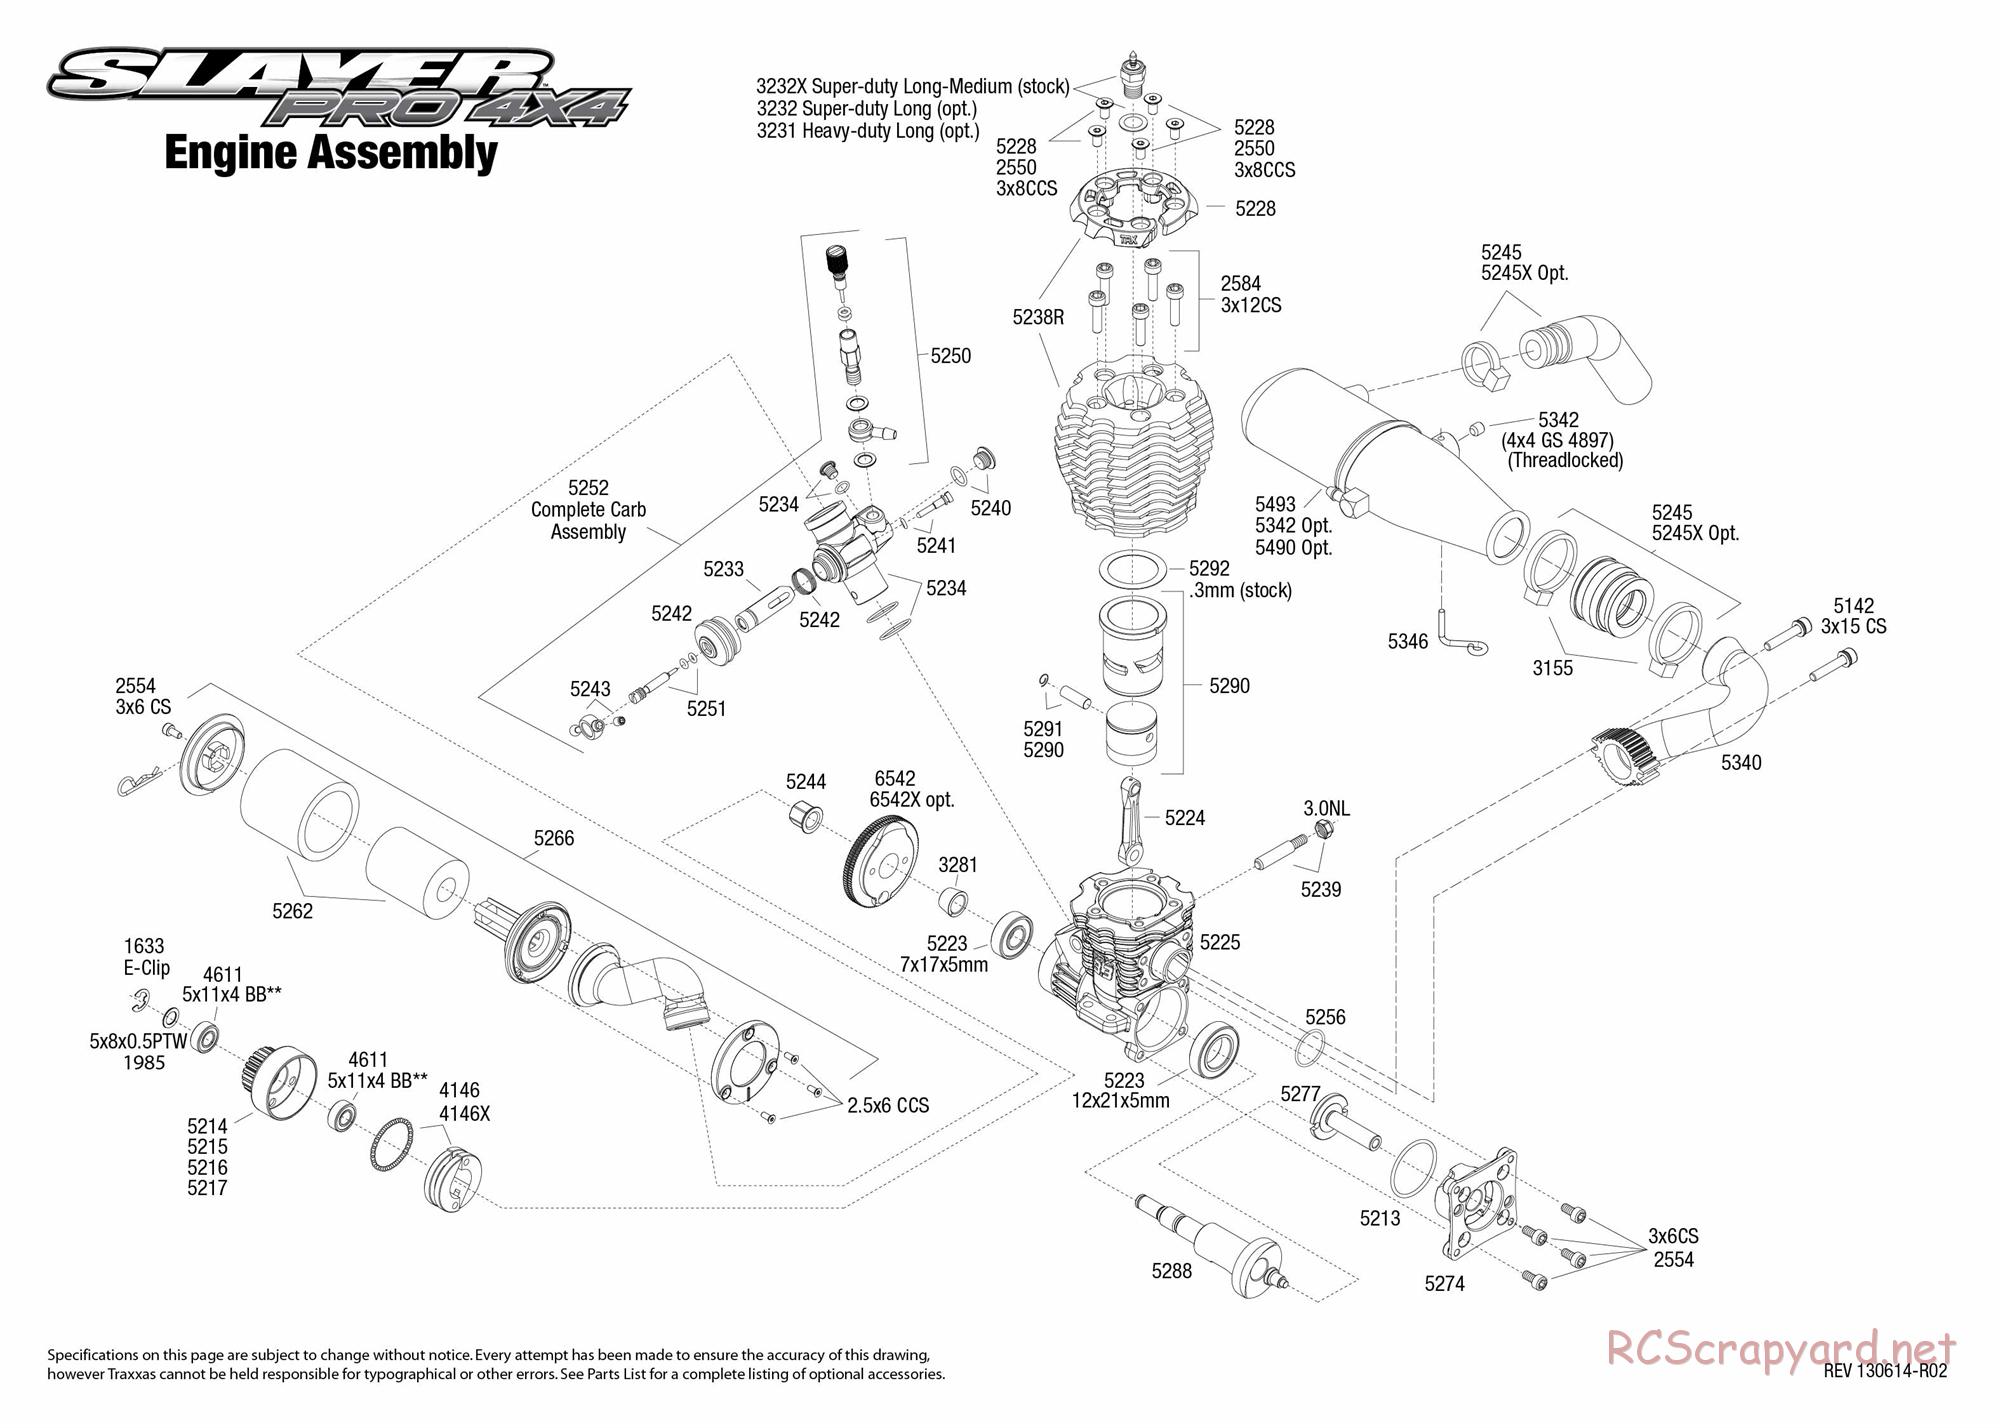 Traxxas - Slayer Pro 4x4 (2012) - Exploded Views - Page 3